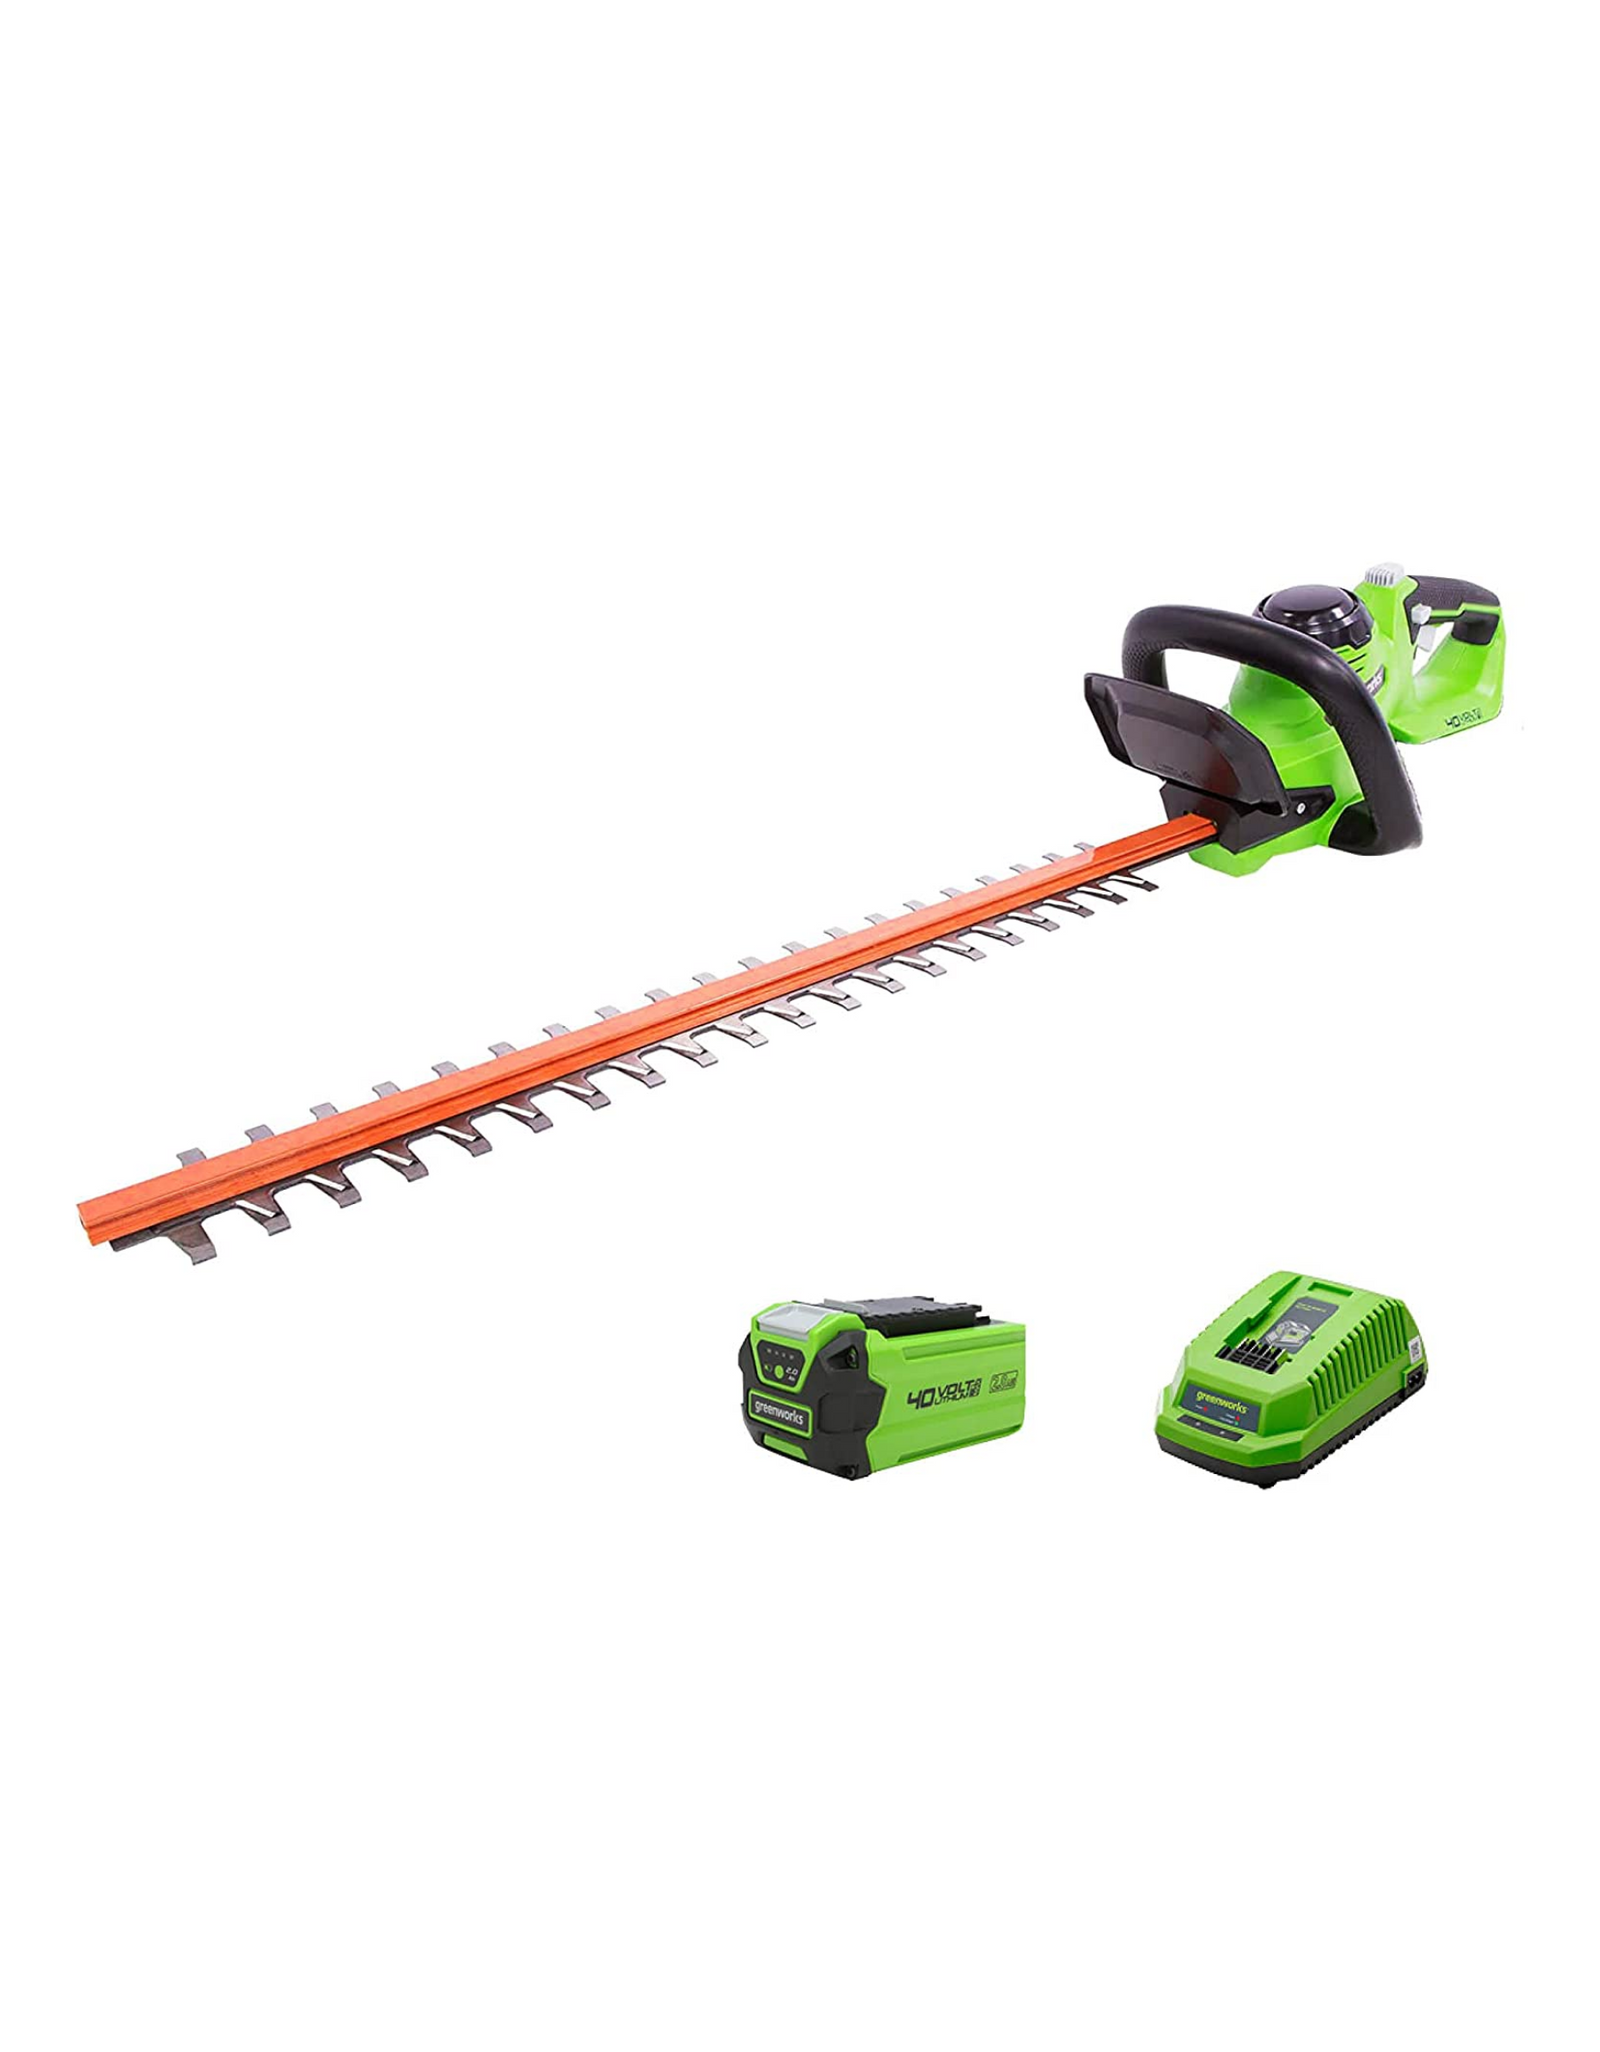 Greenworks 40V 24 Inch Cordless Hedge Trimmer HT40B210 - with Charger and 2.0Ah Battery